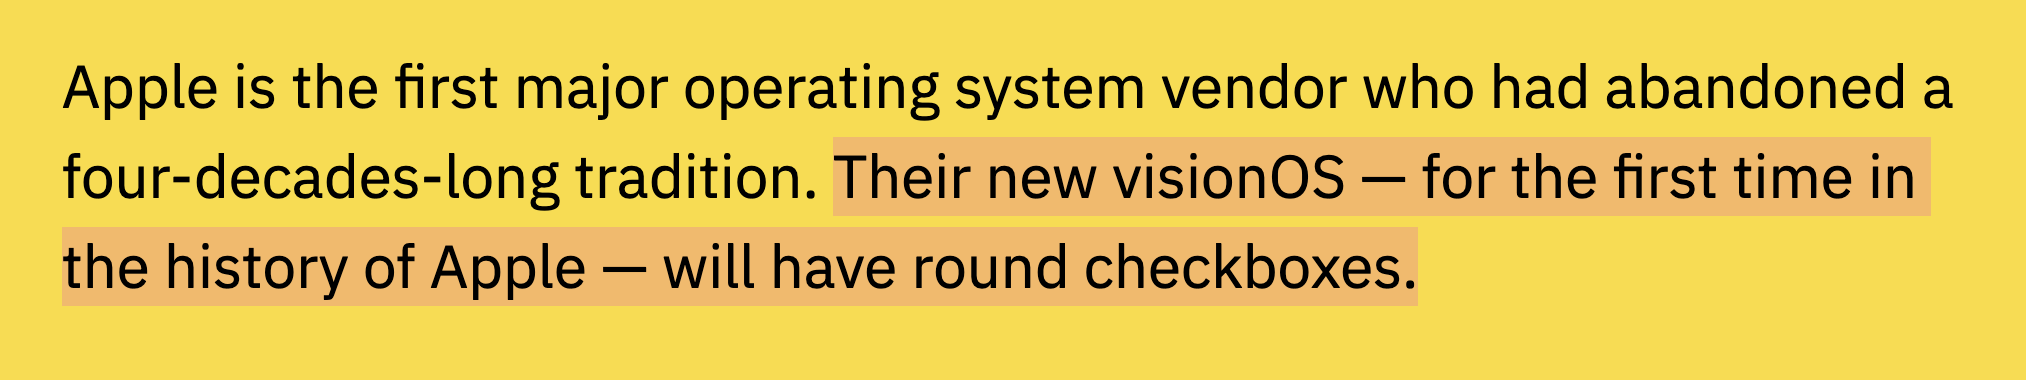 Apple is the first major operating system vendor who had abandoned a four-decades-long tradition. Their new visionOS — for the first time in the history of Apple — will have round checkboxes.